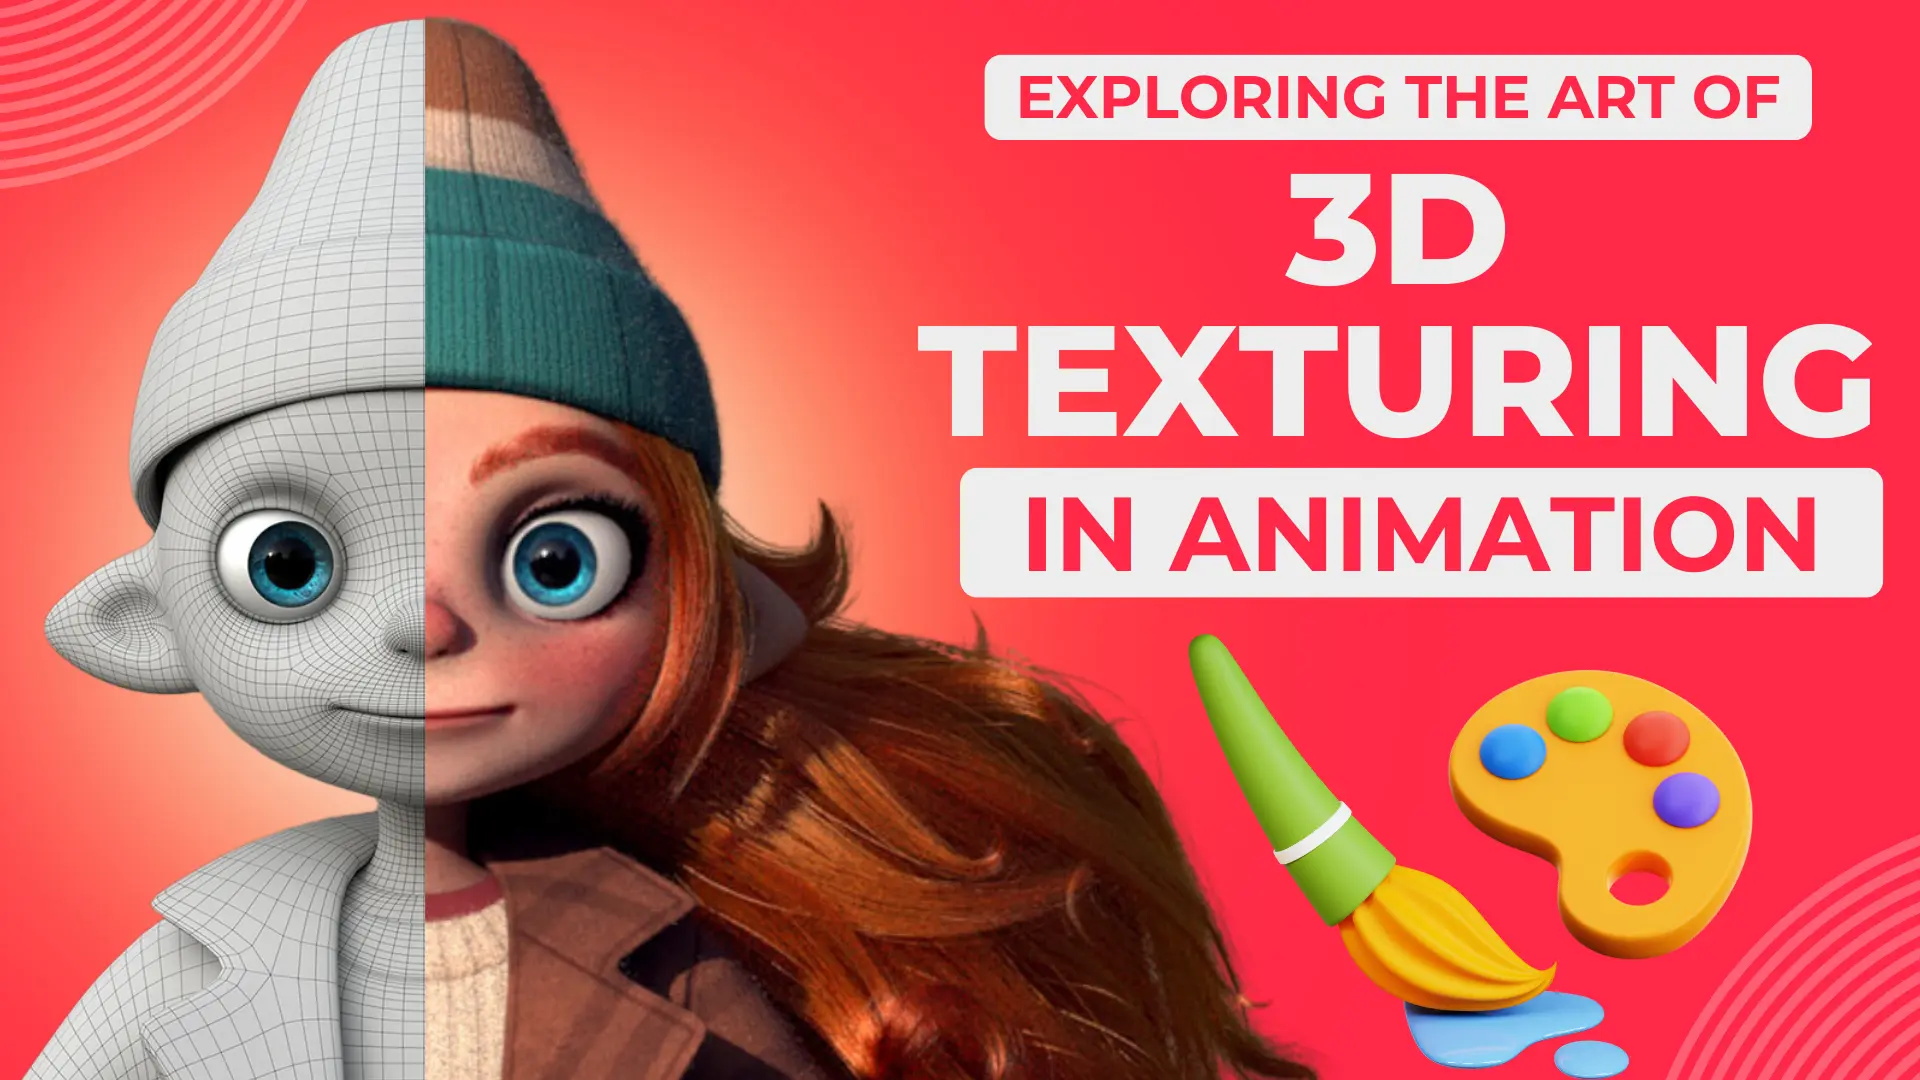 Exploring the art of 3d texturing in animation